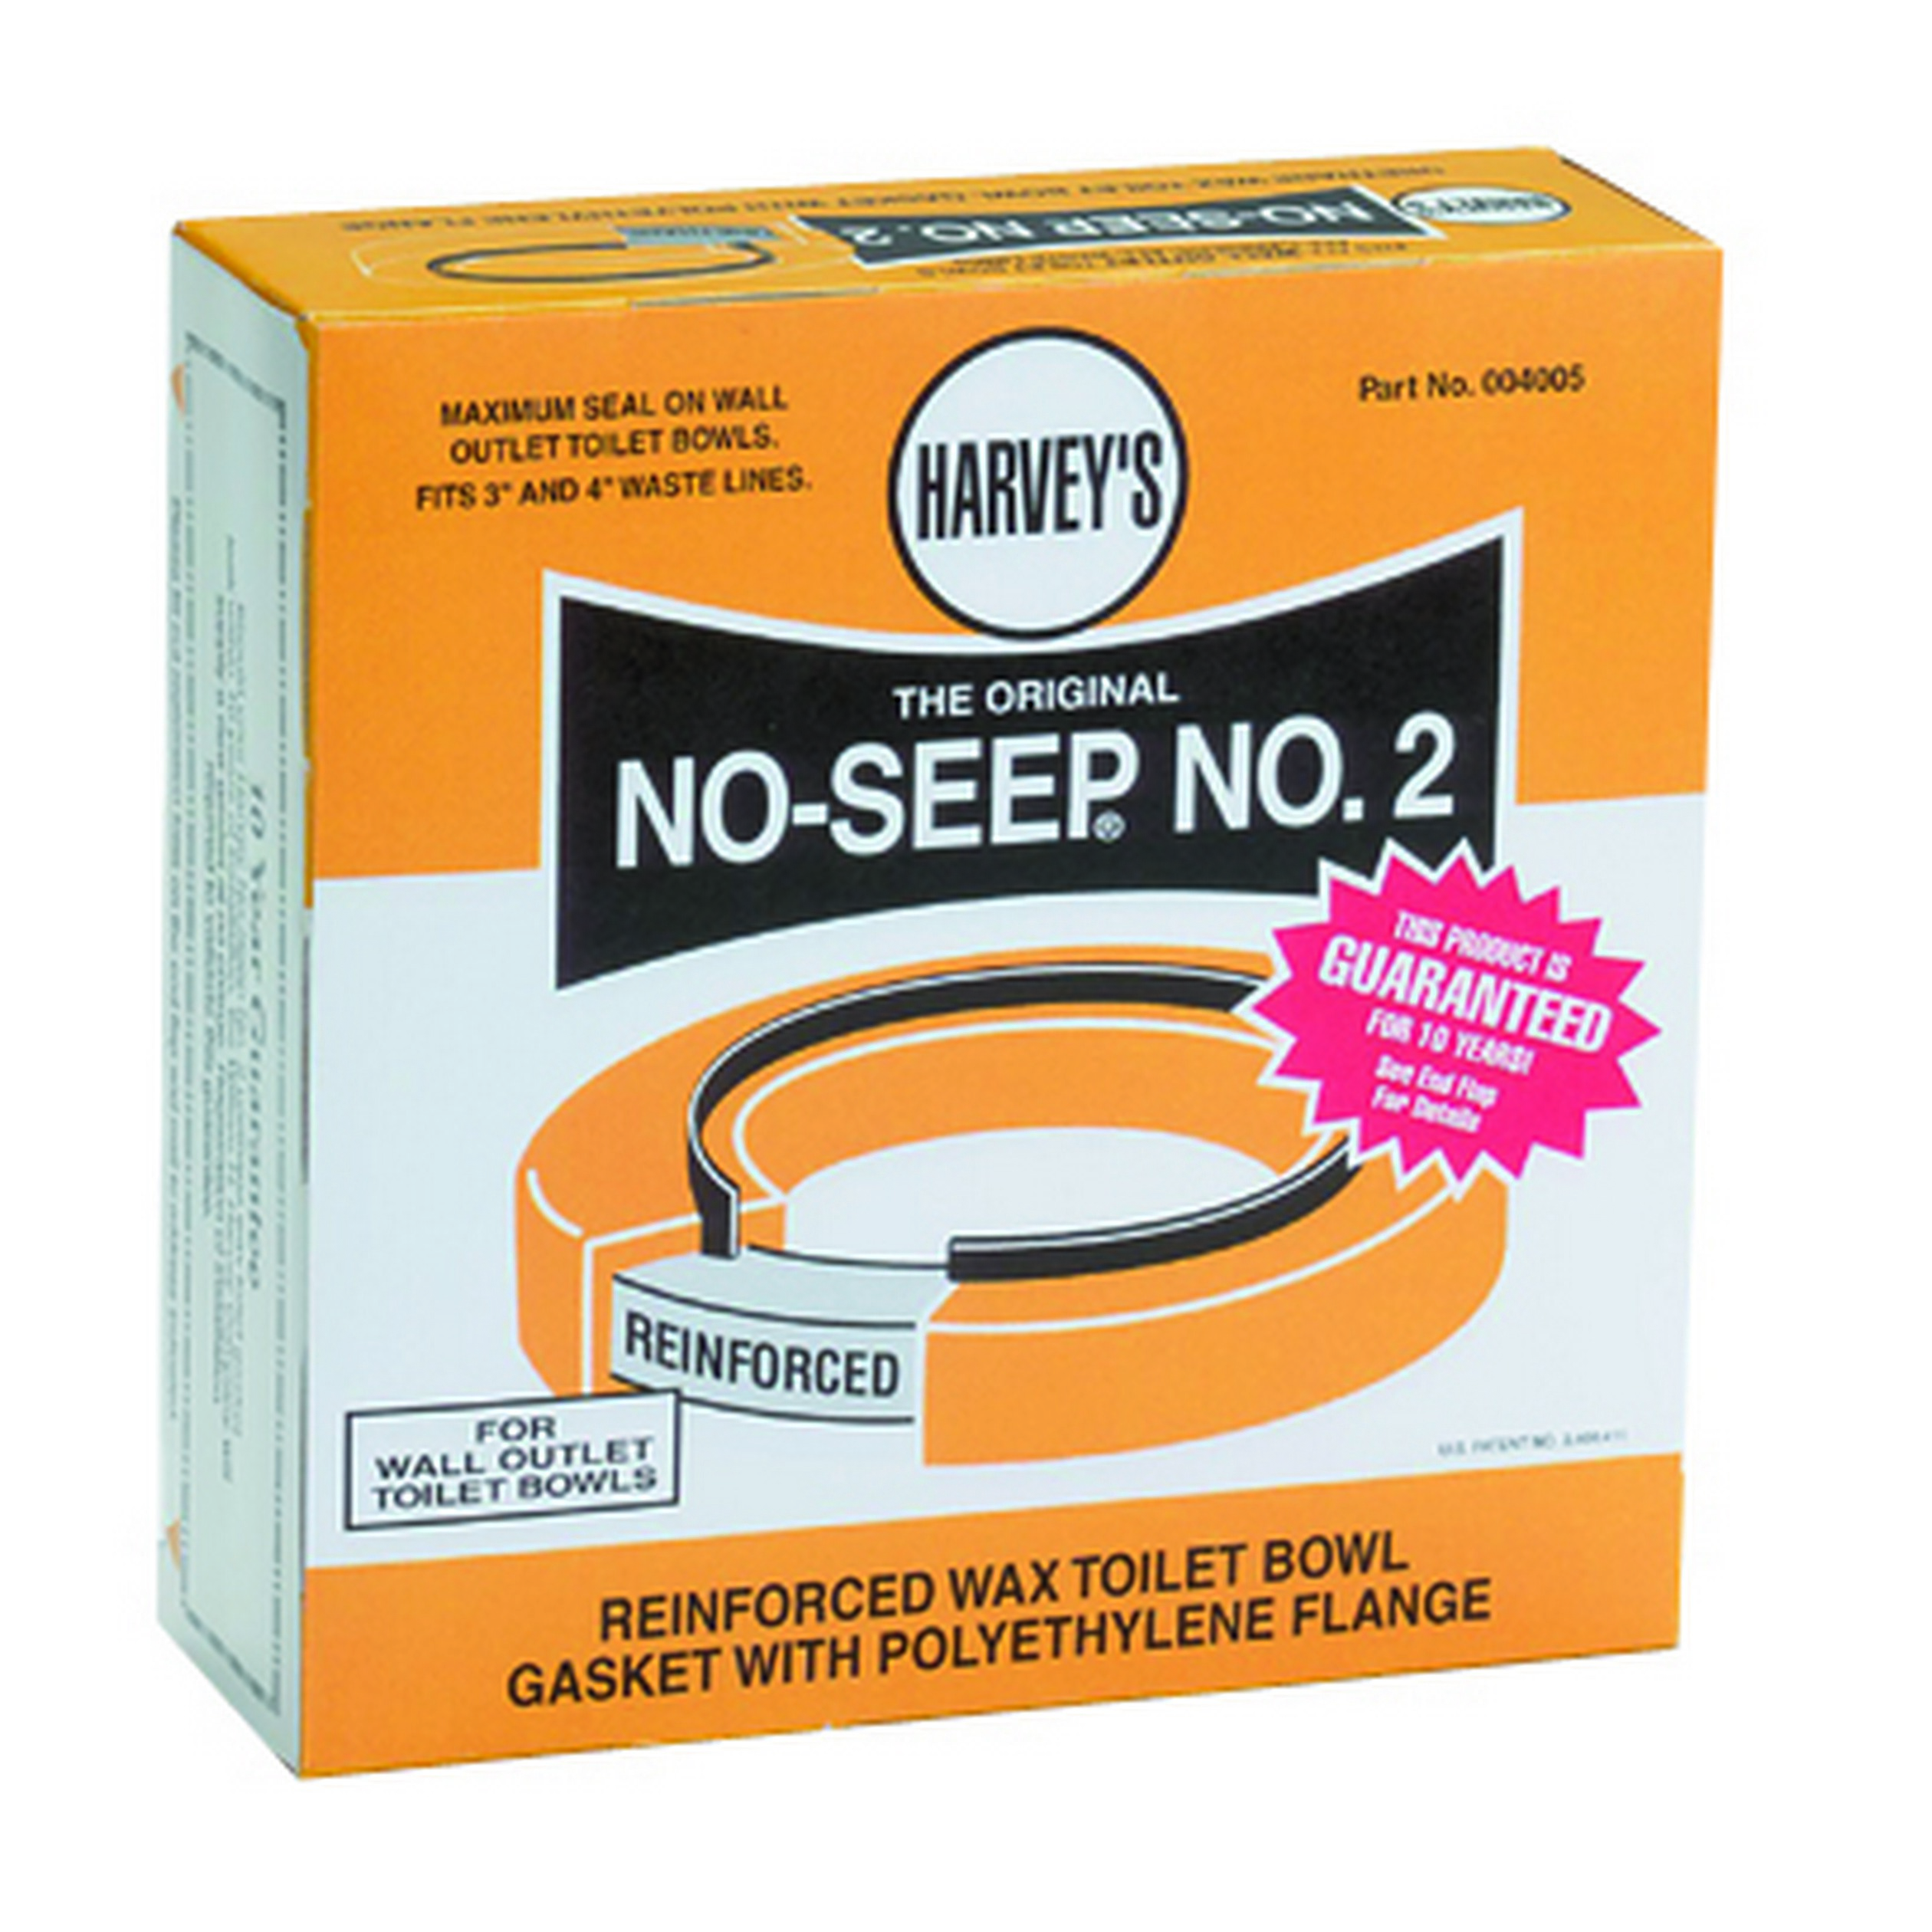 William H. Harvey 004005 No-Seep® No. 2 Specialty Reinforced Wax Gasket With Plastic Flange, For Use With 3 and 4 in Waste Lines